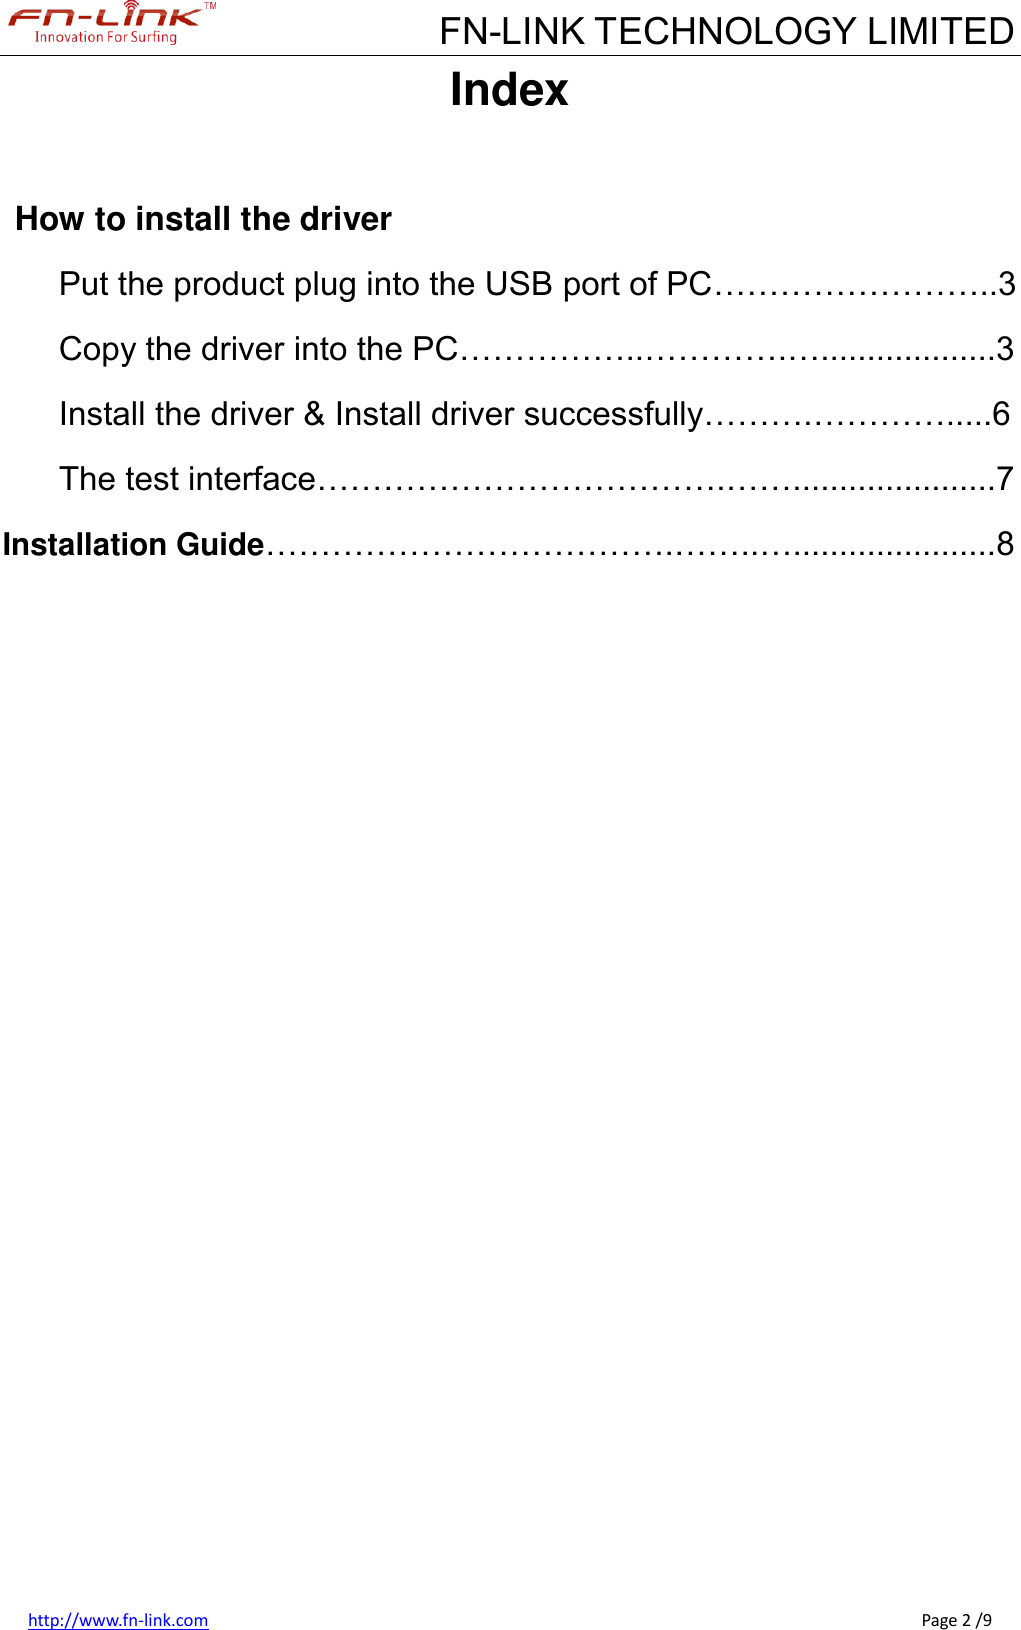             FN-LINK TECHNOLOGY LIMITED http://www.fn-link.com                                                                                                                                                      Page 2 /9 Index  How to install the driver Put the product plug into the USB port of PC……………………..3 Copy the driver into the PC……………..………….…...................3 Install the driver &amp; Install driver successfully……….………….....6 The test interface……………………………….……......................7 Installation Guide……………………………….……..…......................8                 